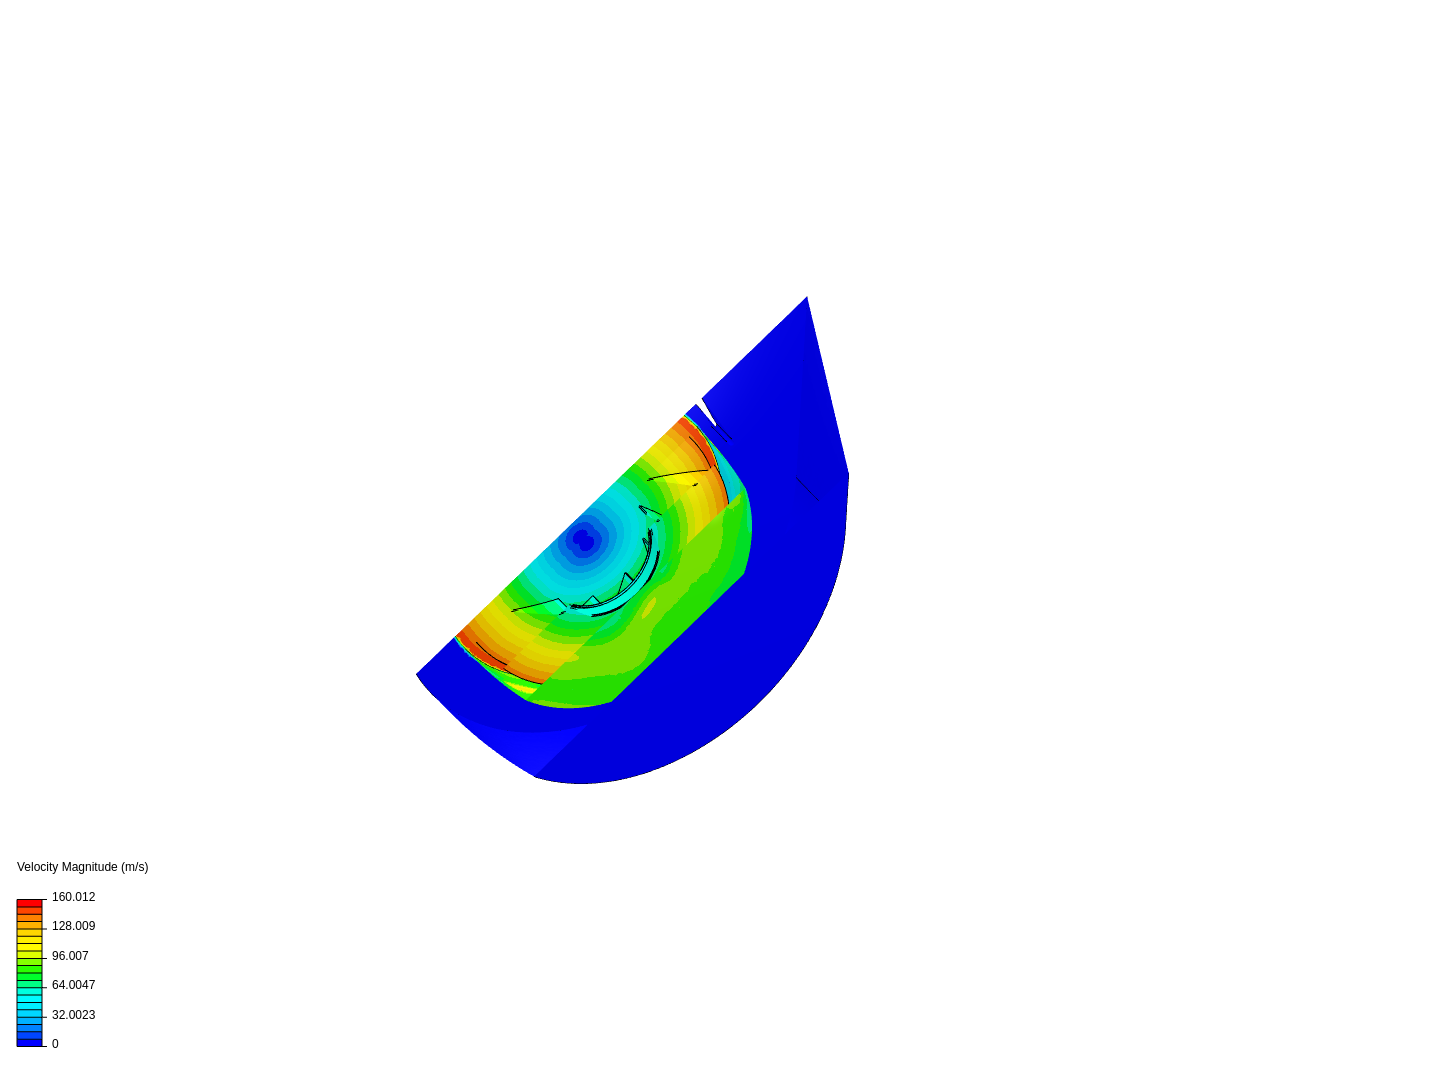 Fan CFD FLOW EXTRUDED 3000 RPM 5800 3612 OK image